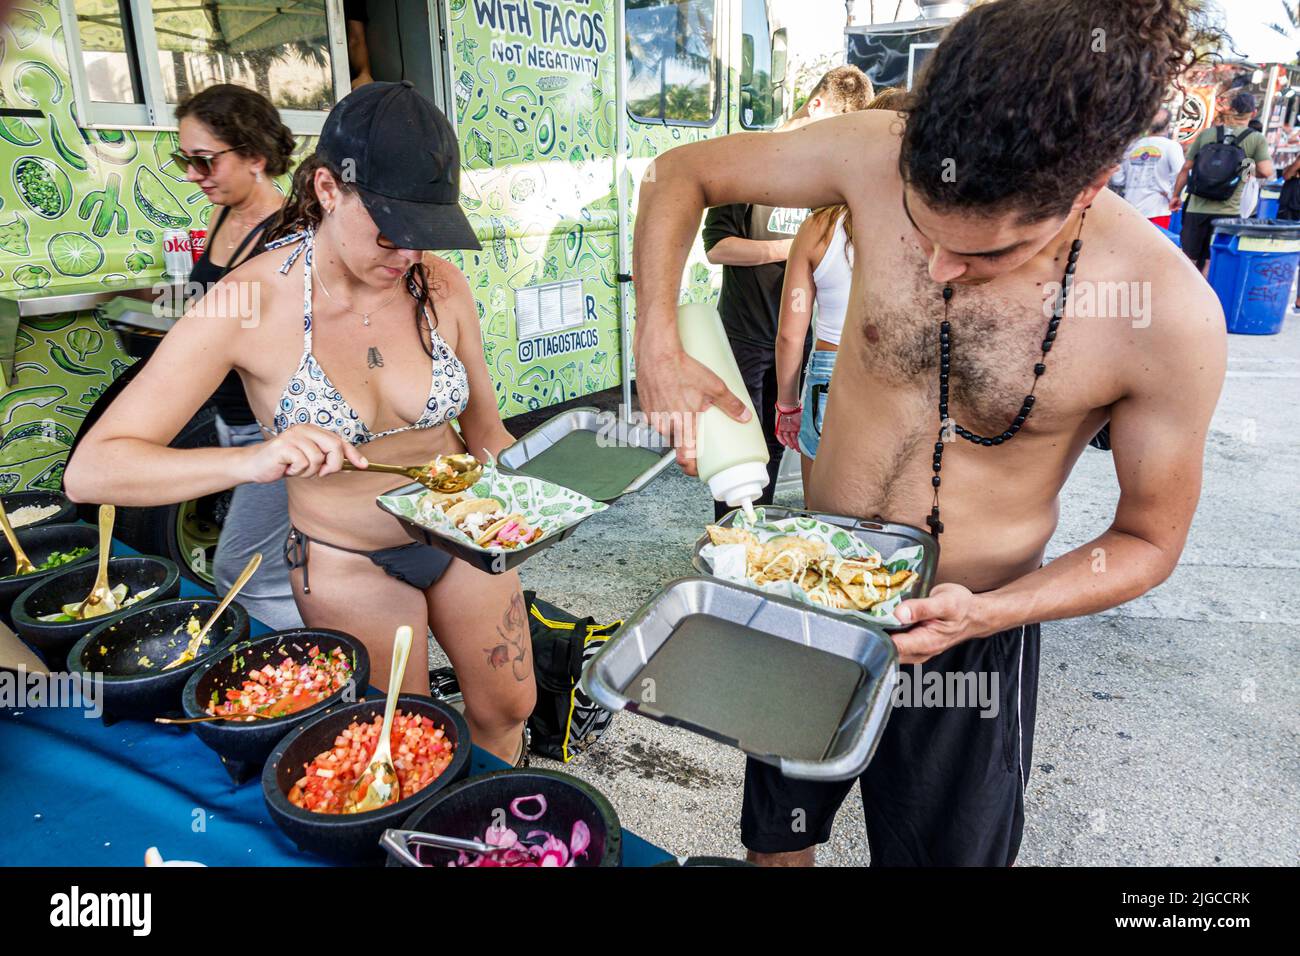 Miami Beach Florida,Ocean Terrace Fire on the Fourth 4th of July Festival event celebration,tacos food truck customers couple man woman adding sauce s Stock Photo